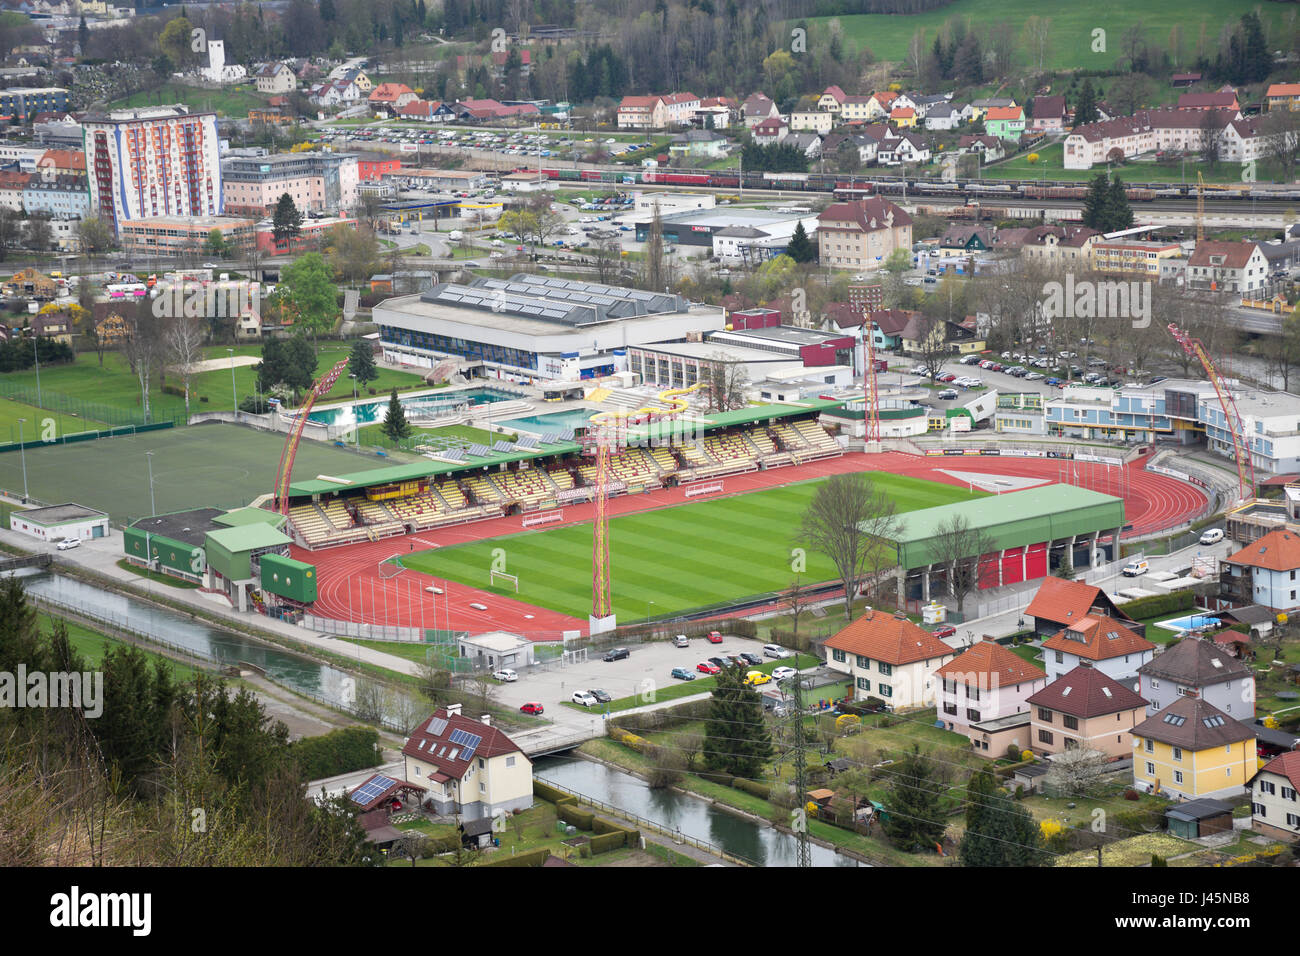 Kapfenberg, seen from south, third largest city in Styria, Austria. In the city centre the football stadium used by the club Kapfenberger SV. Stock Photo